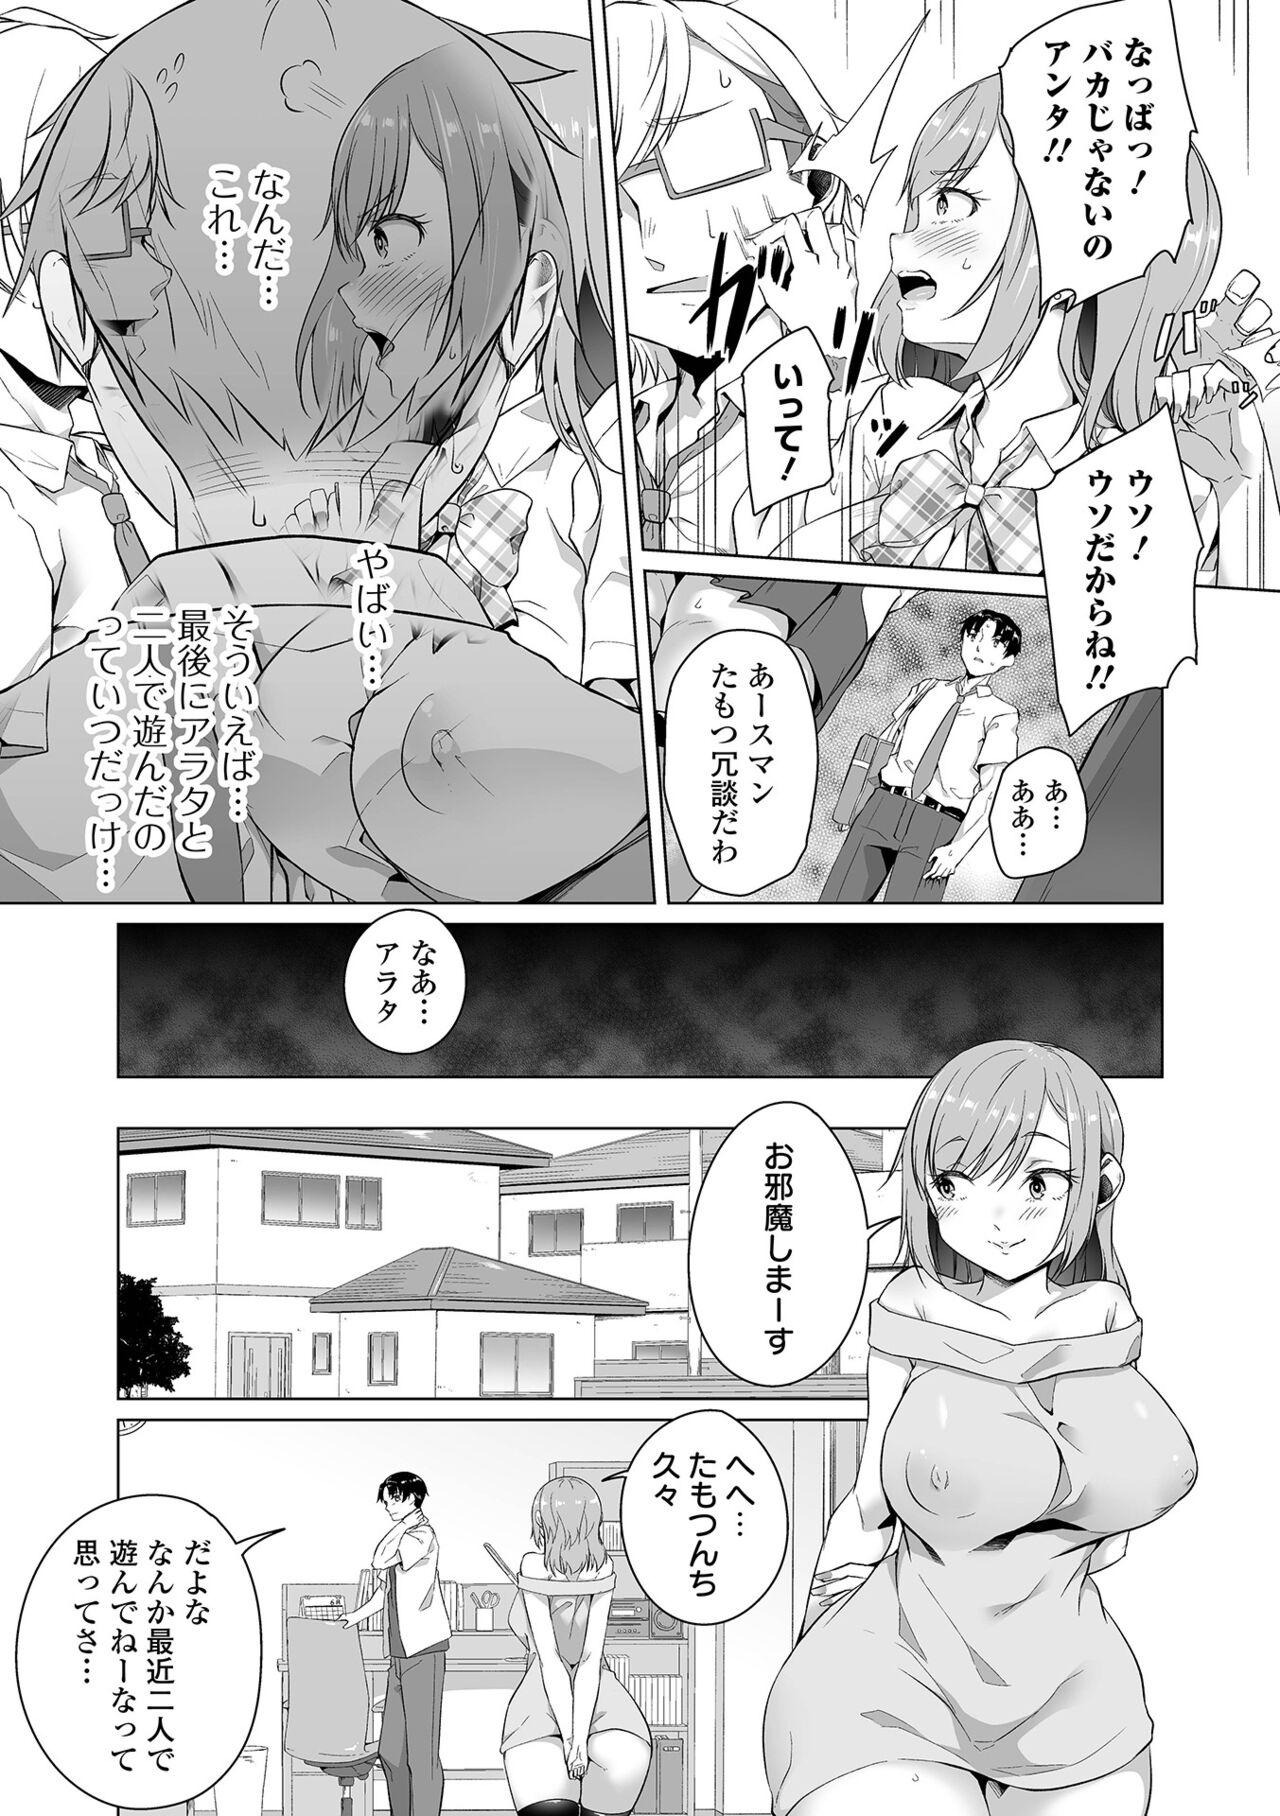 Hairy COMIC Orga Vol. 38 Insertion - Page 9